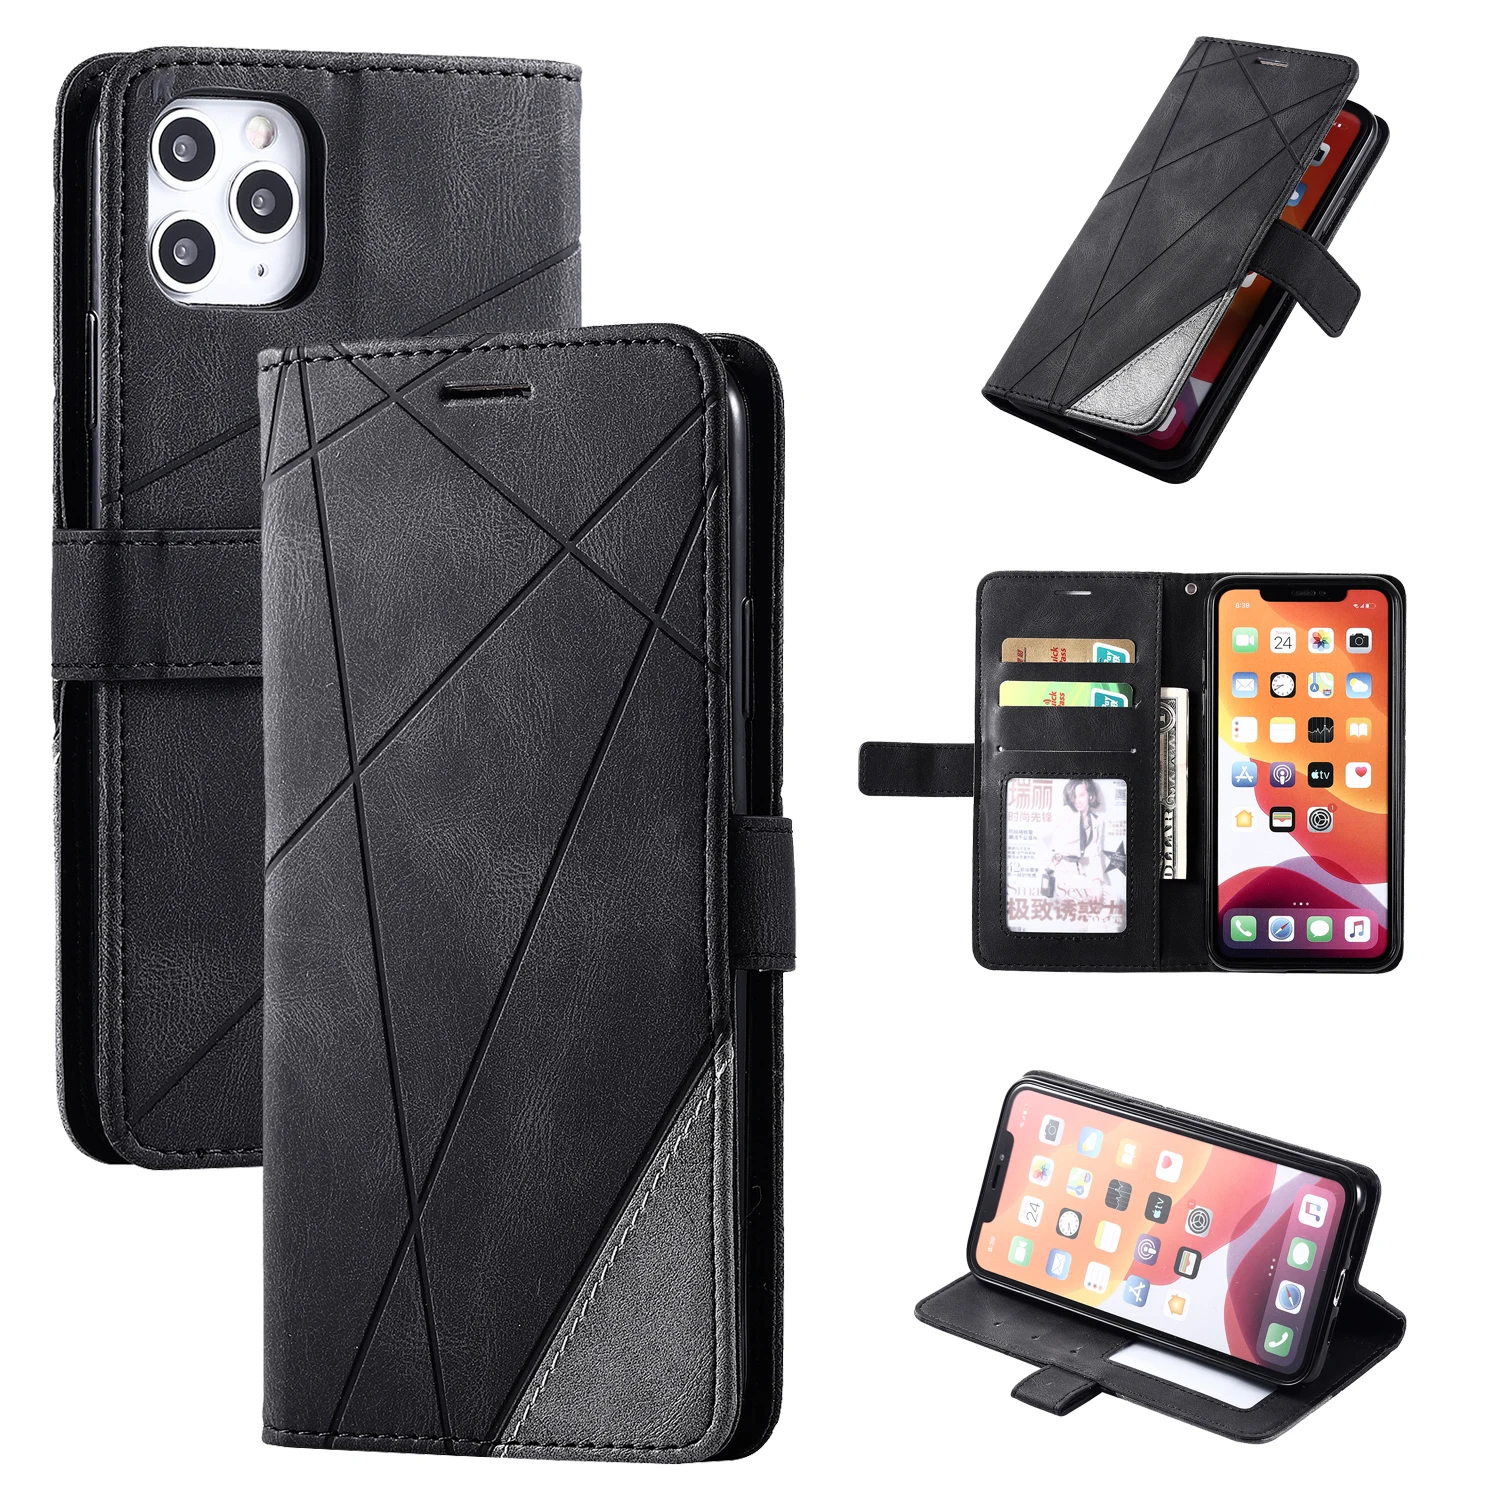 

Etui Wallet Flip Stand Case For OPPO Realme 5 5S 6 6S 7 7i 8 Pro 4G 5G C1 C2 C3 C12 C15 C17 C20 C11 2021 Find X2 X3 Pro 5G Cover